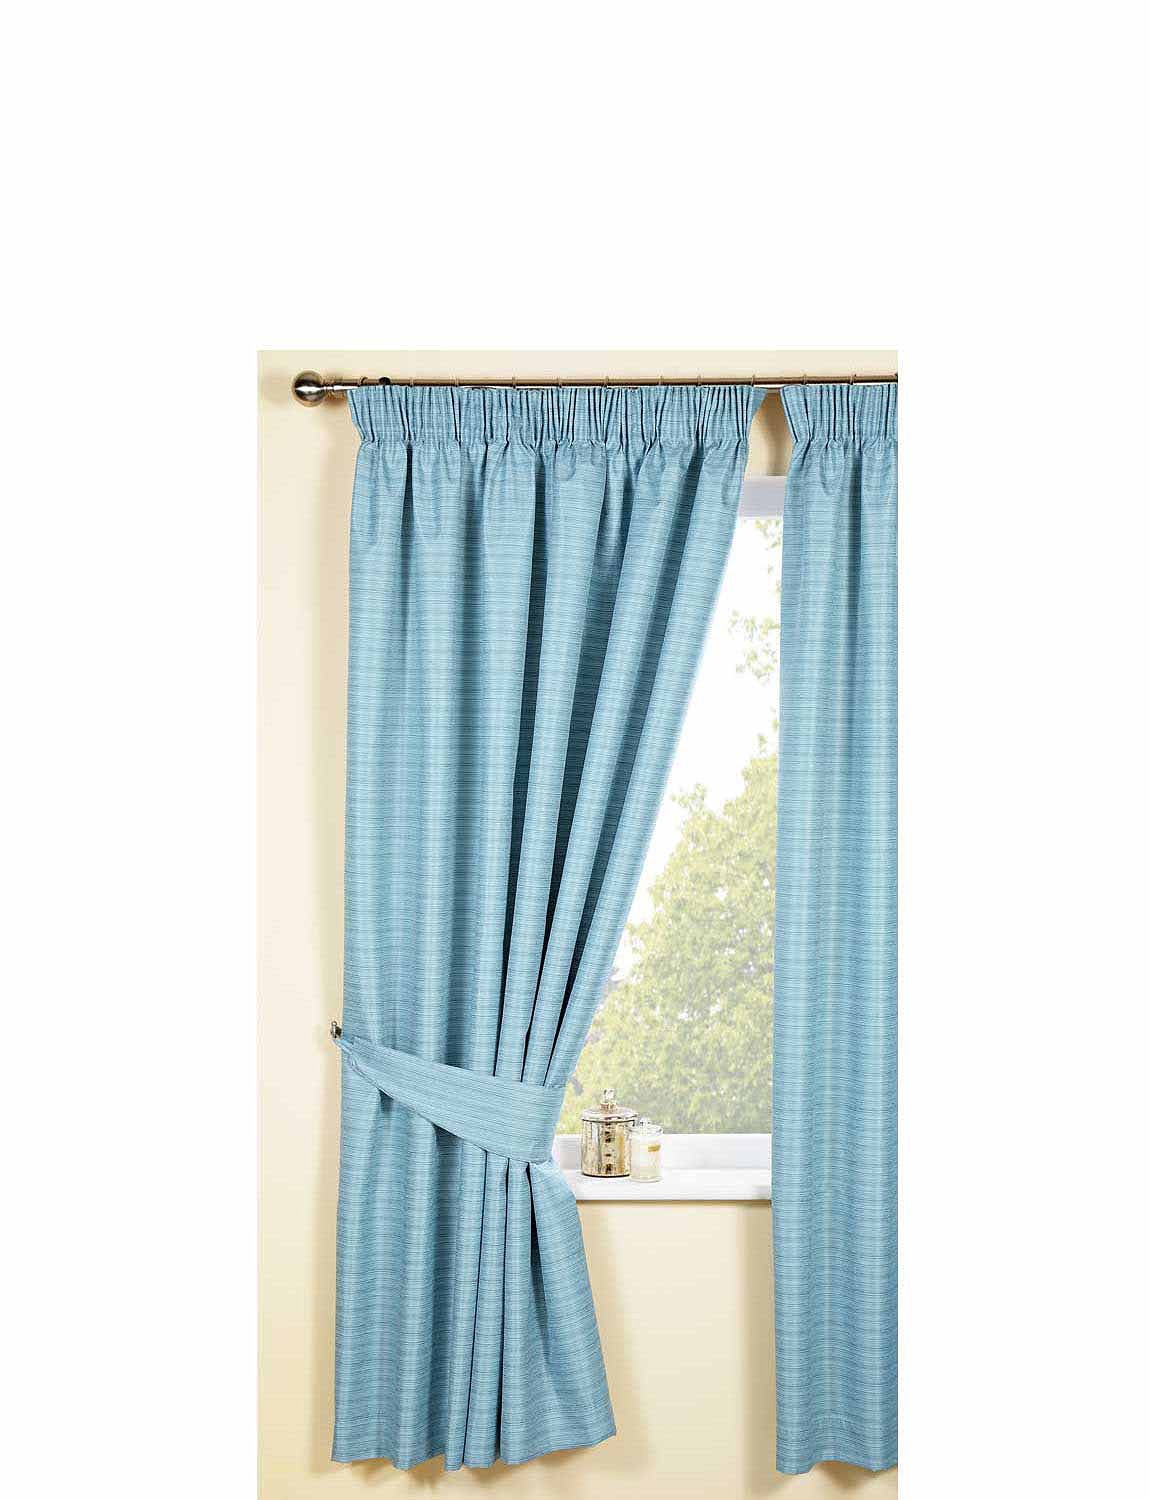 Aspen Thermal Blockout Curtains By Rectella - Home